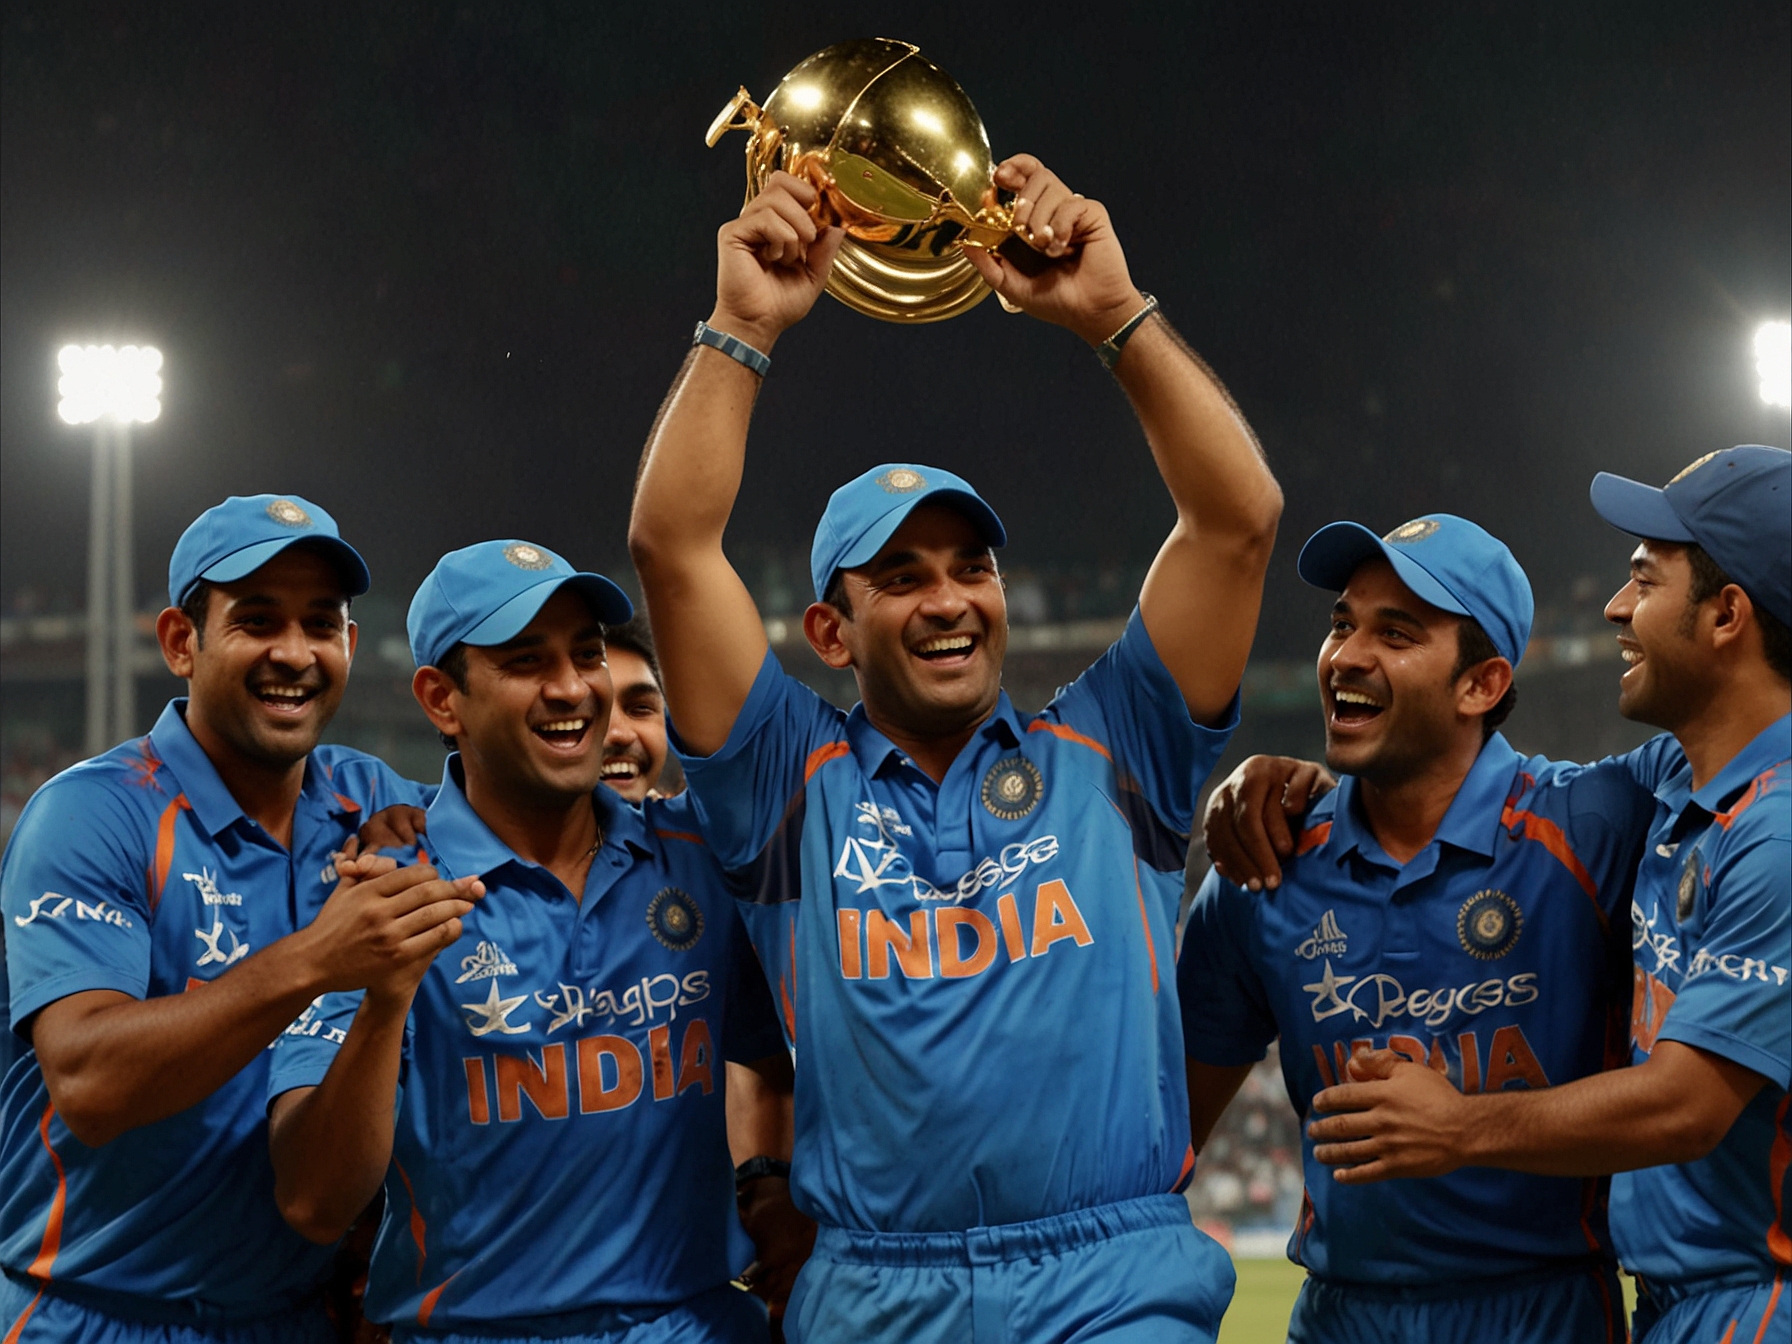 Indian captain Mahendra Singh Dhoni celebrates with teammates after clinching a thrilling 5-run victory over England in the 2013 ICC Champions Trophy final, adding another title to his legacy.